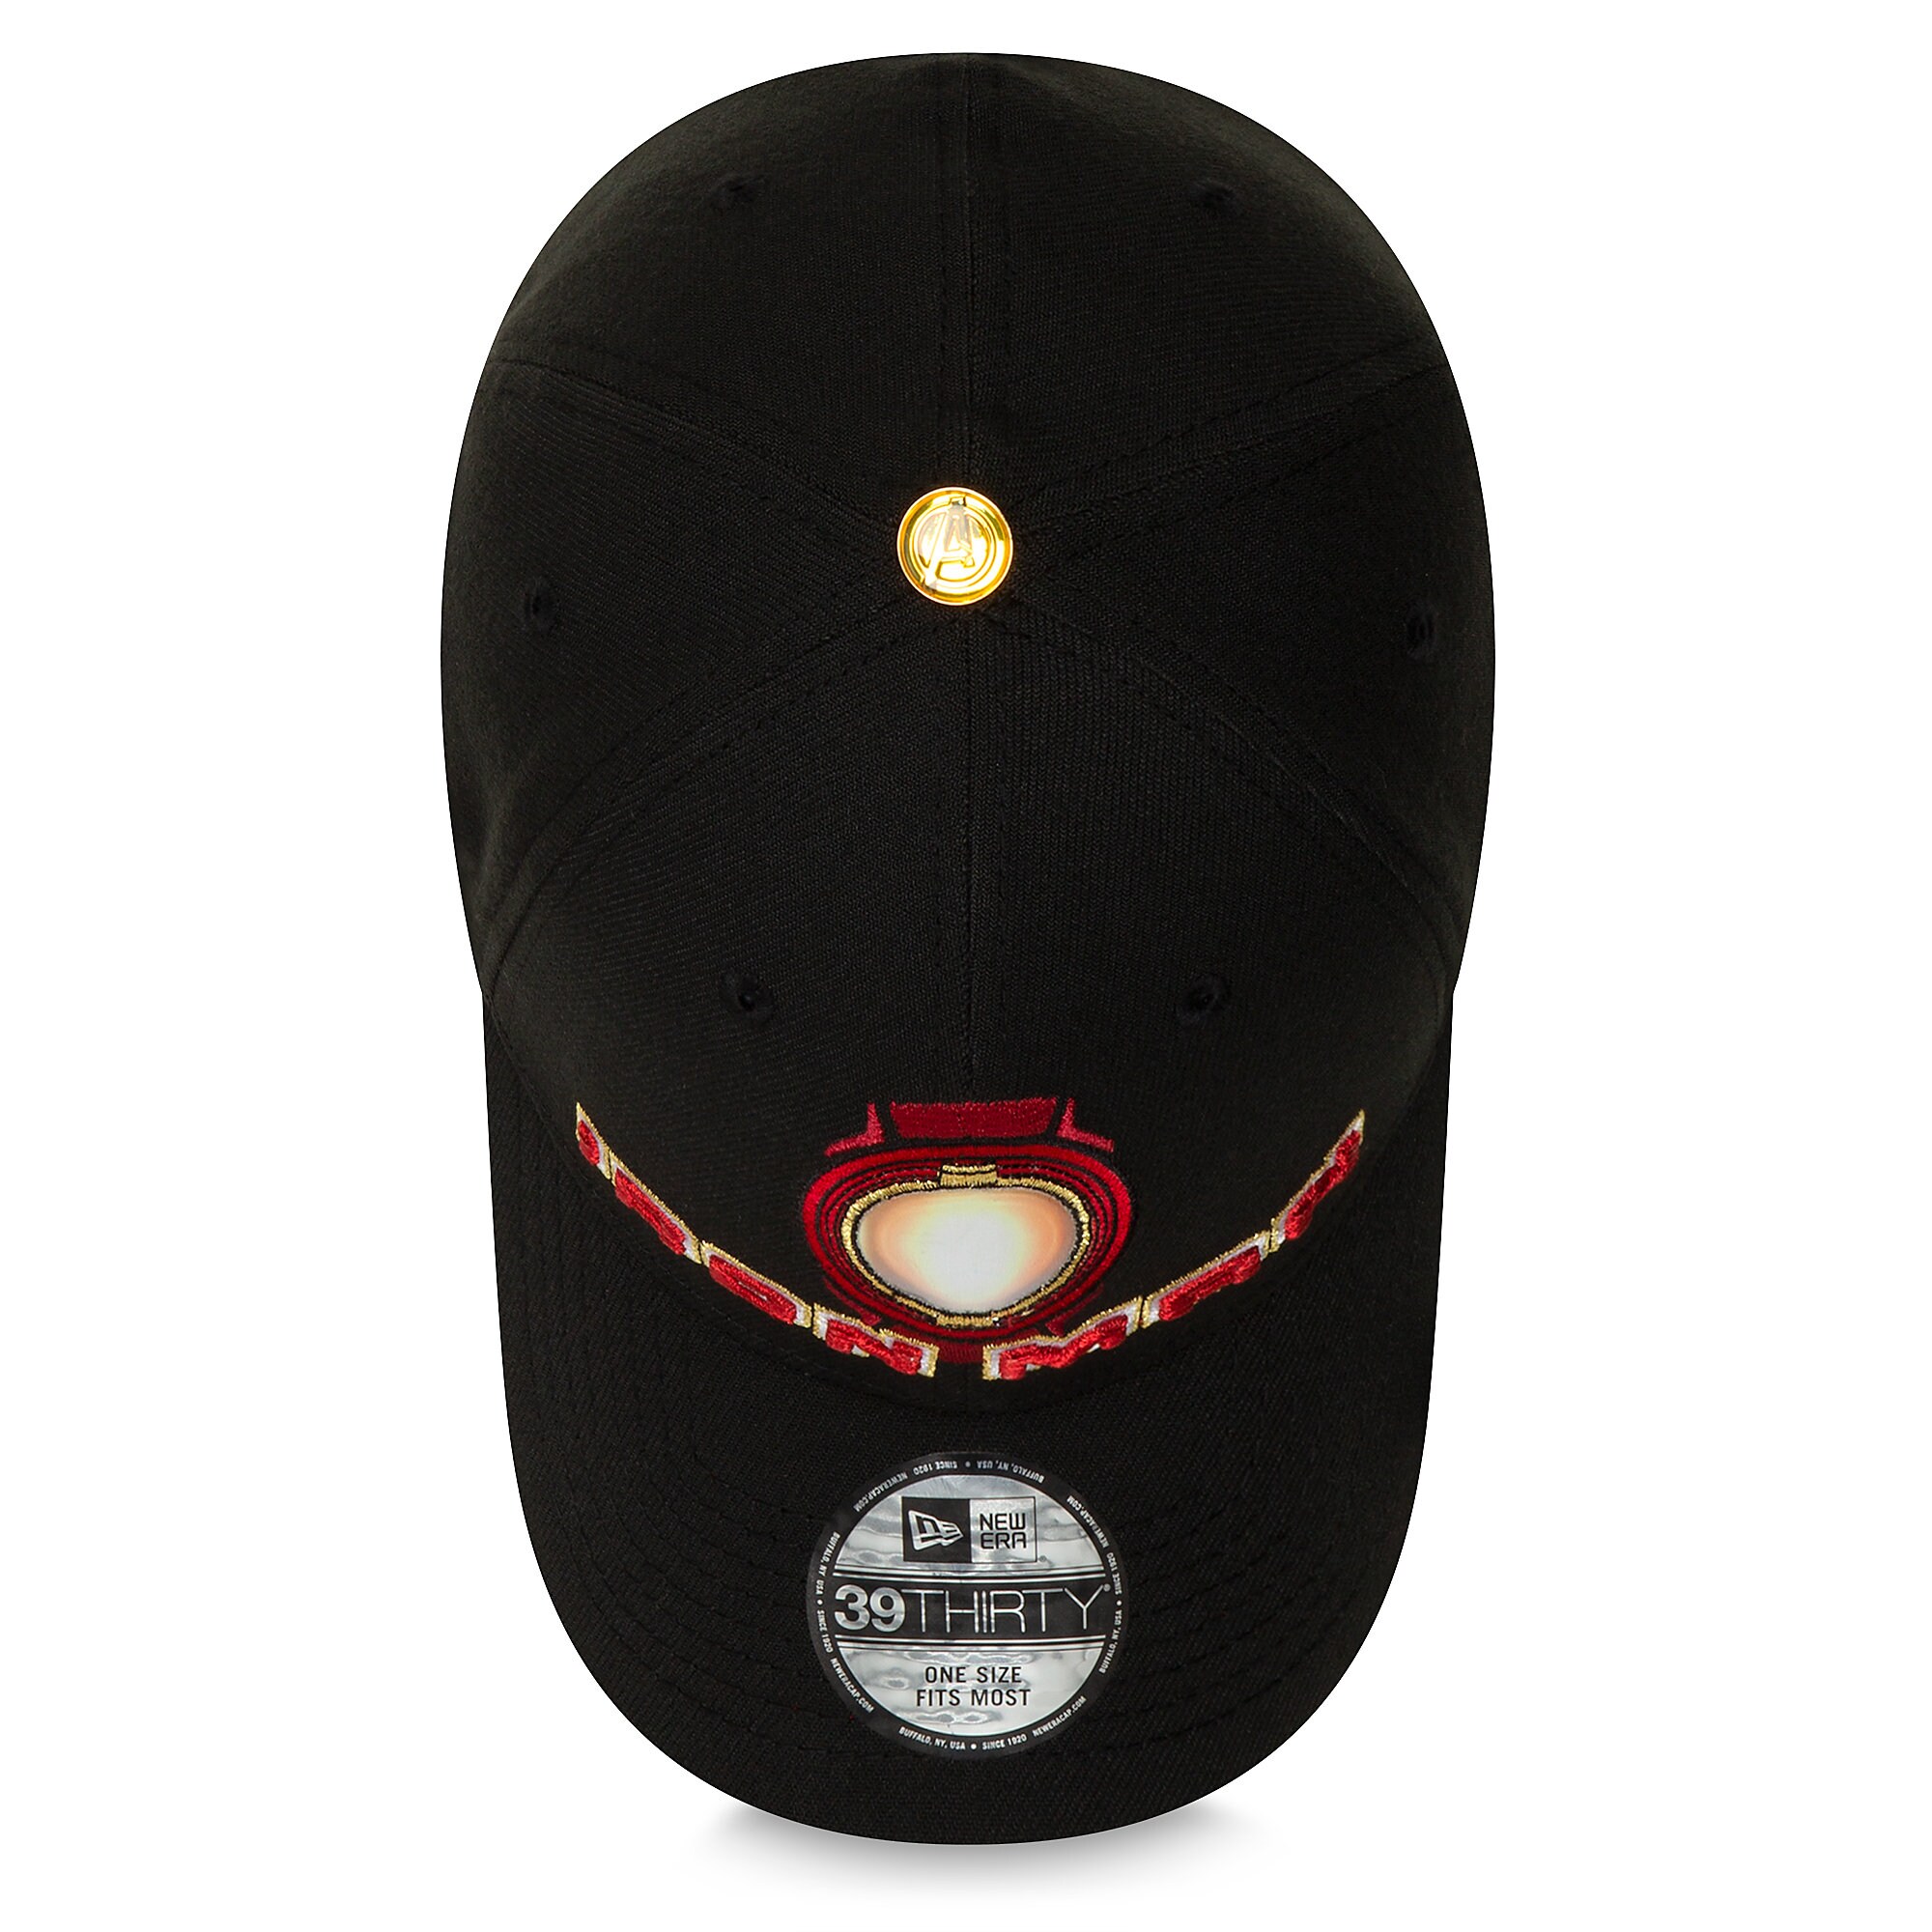 Limited Edition Collector Boxed Iron Man Cap by New Era